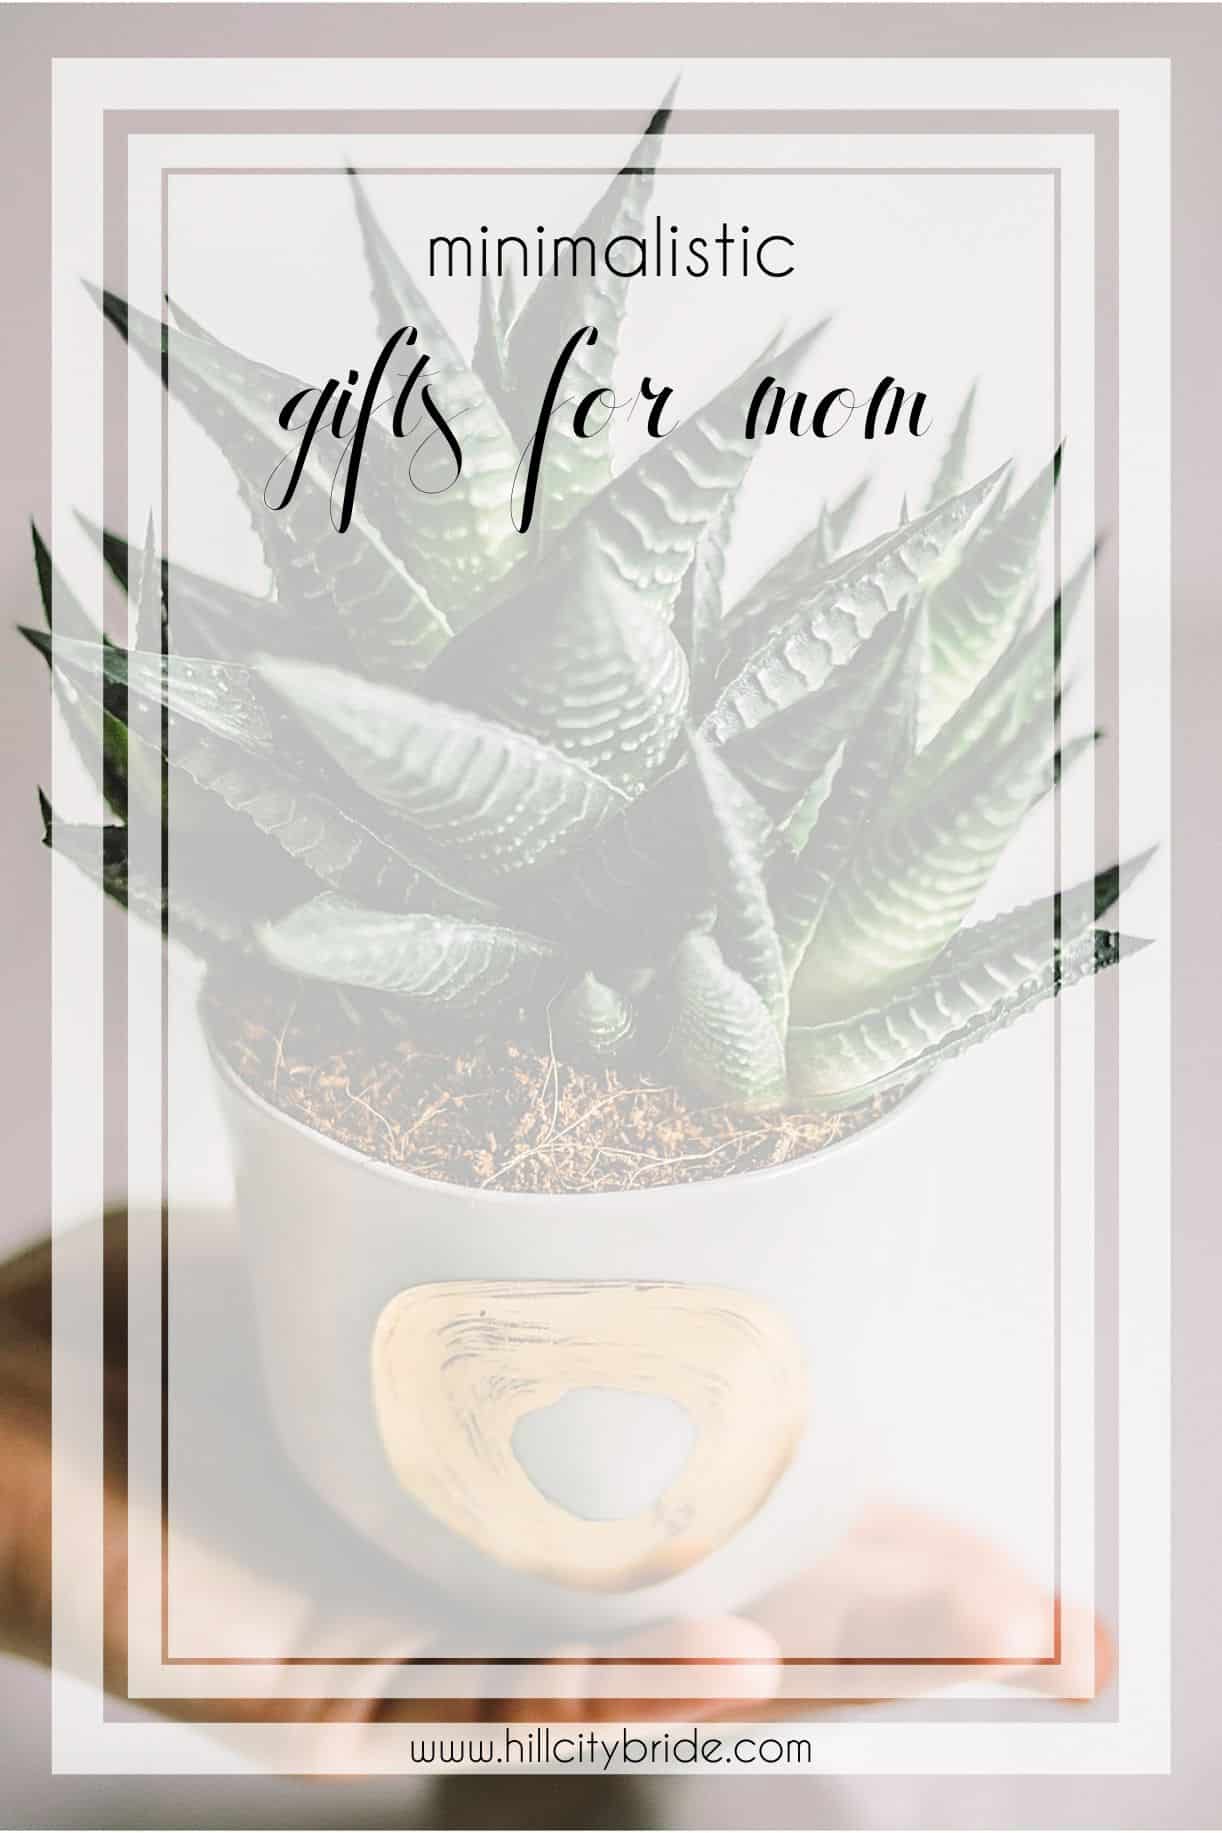 Minimalistic Gifts for Mom | Mother of the Bride | Mother of the Groom | Hill City Bride Virginia Weddings